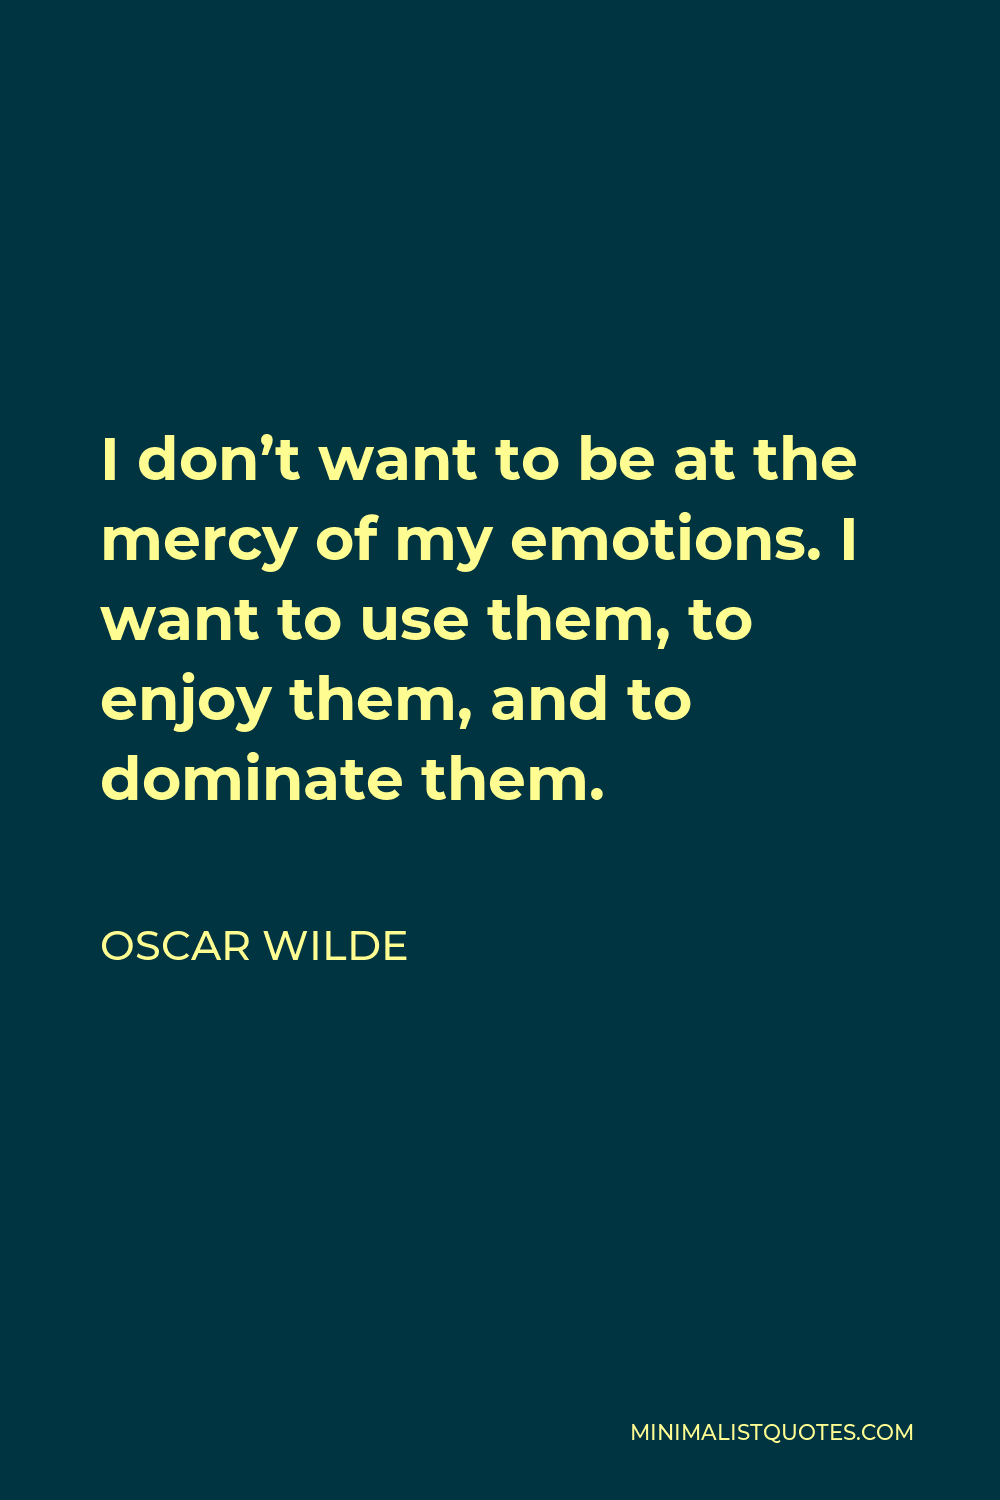 Oscar Wilde Quote I Don T Want To Be At The Mercy Of My Emotions I Want To Use Them To Enjoy Them And To Dominate Them